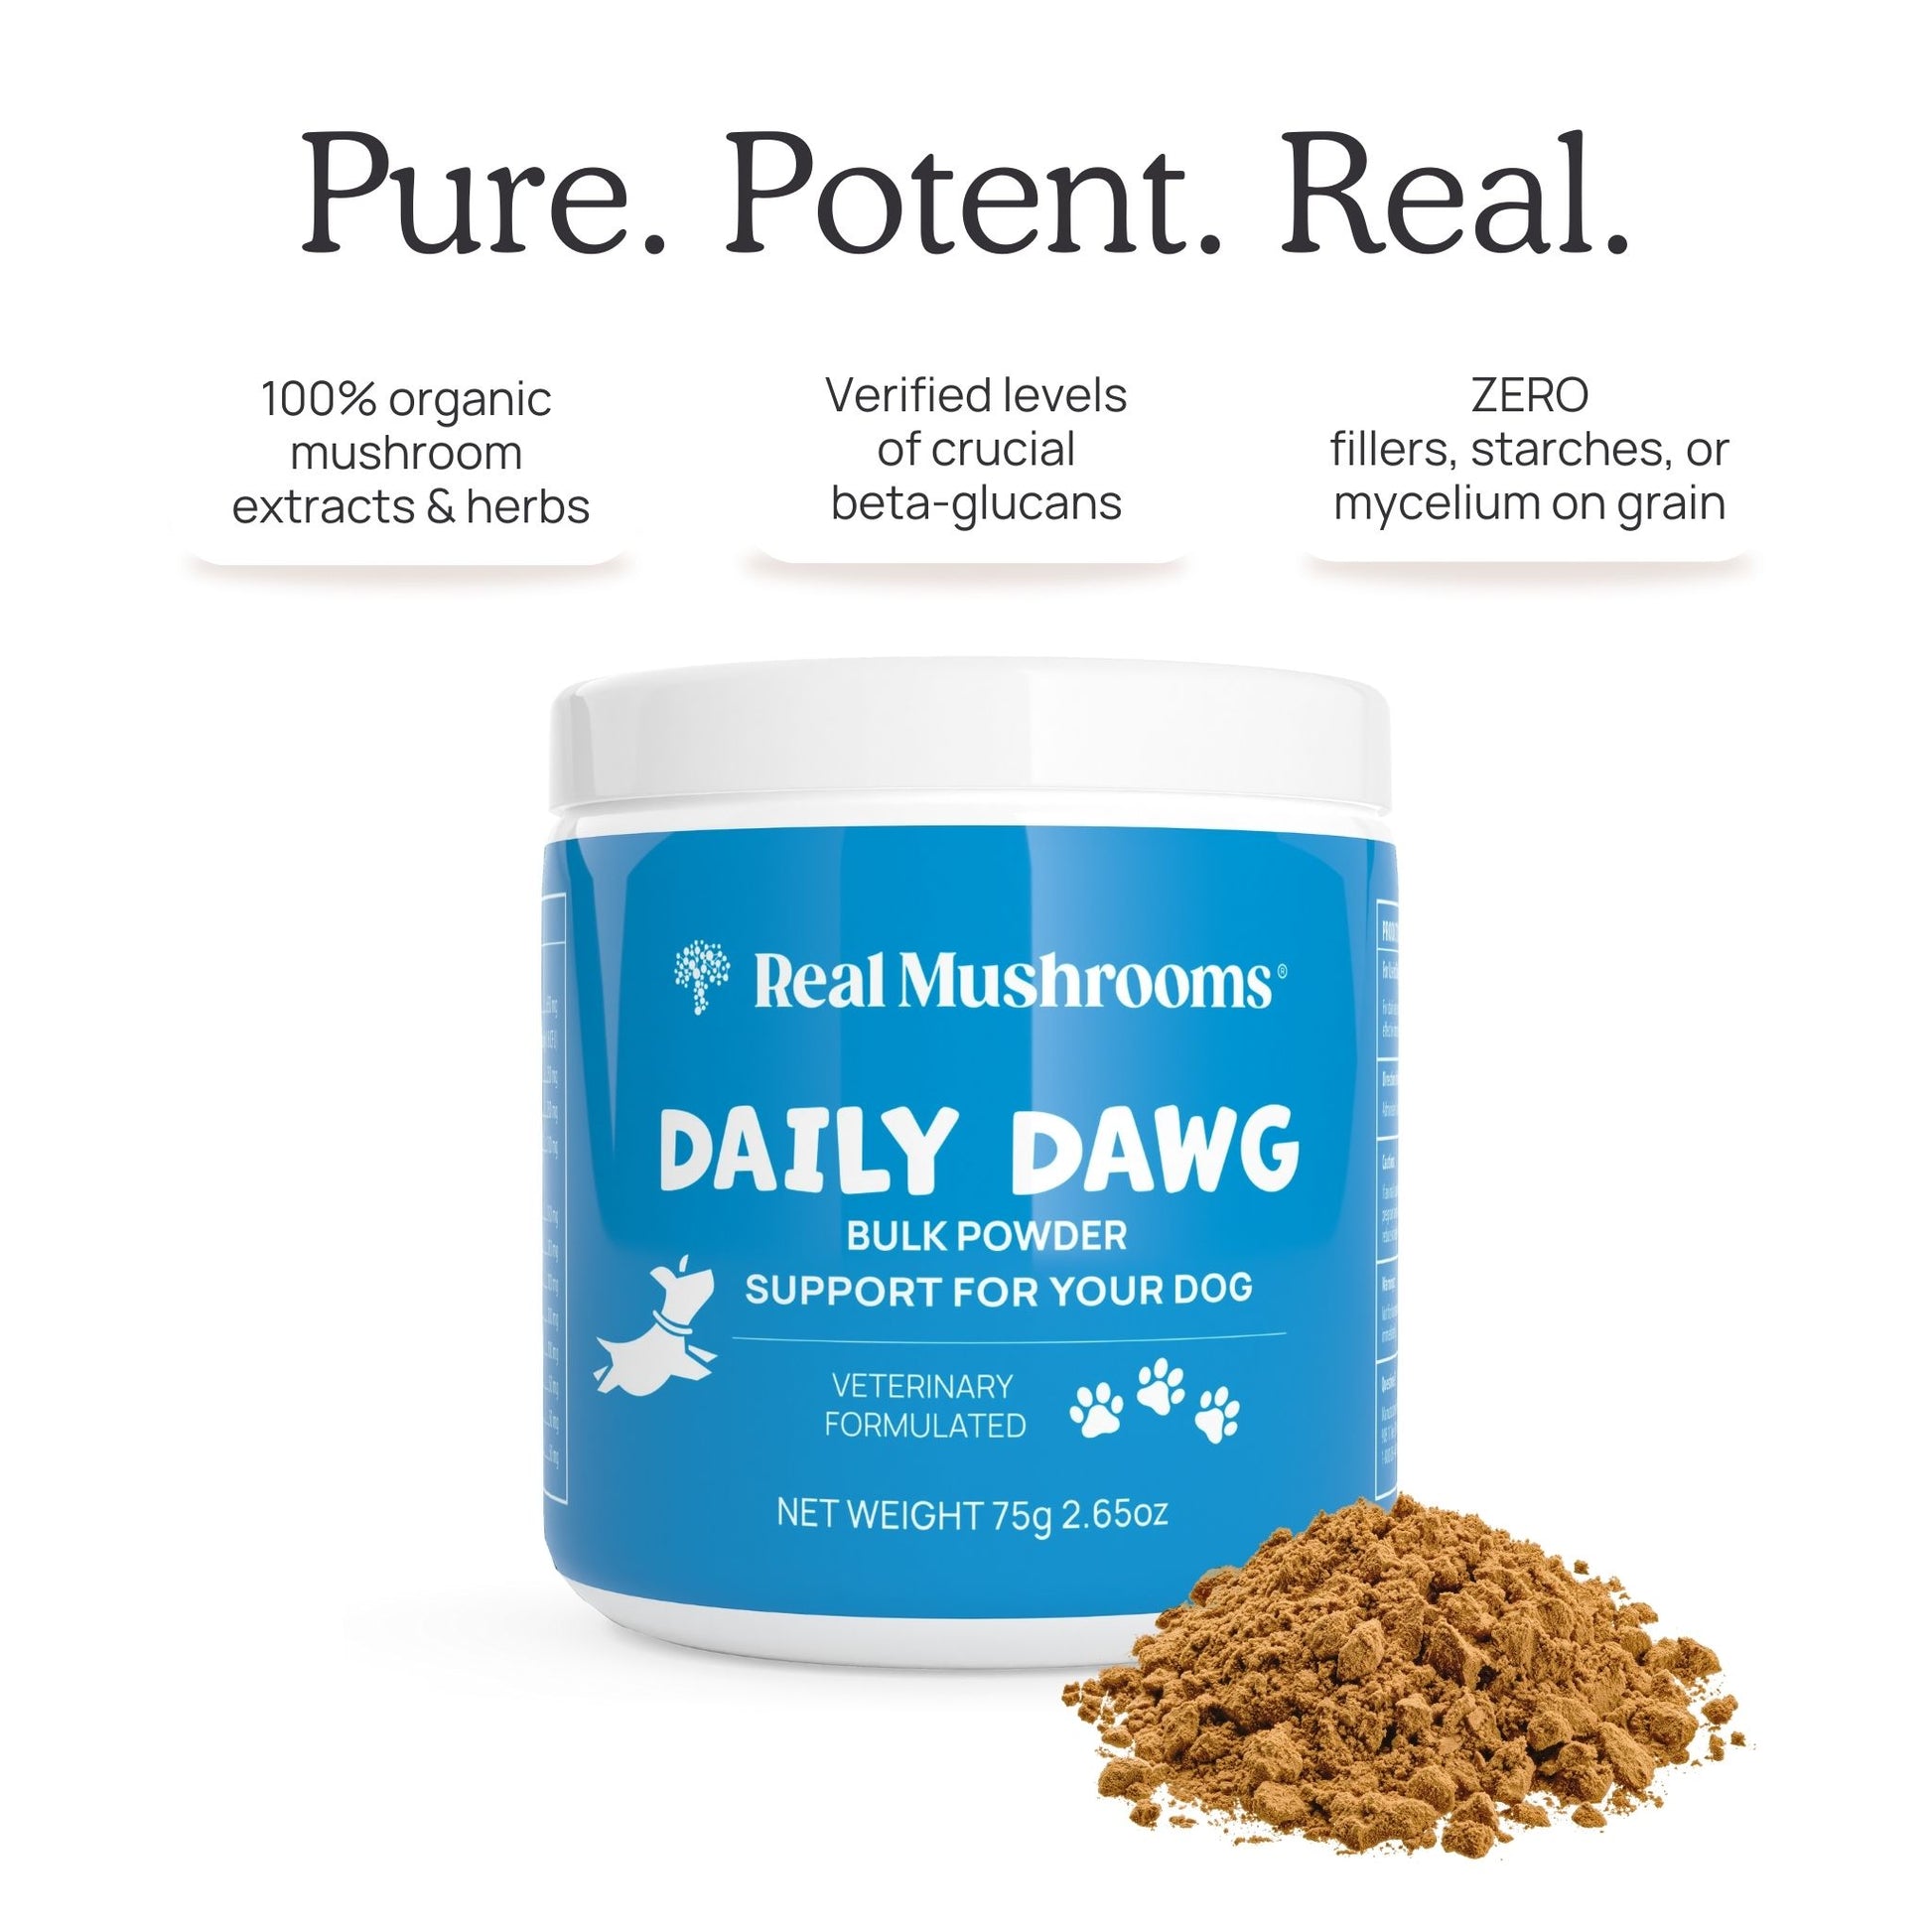 Enjoy Daily Dawg Powder for Pets, now gluten-free, by Real Mushrooms!